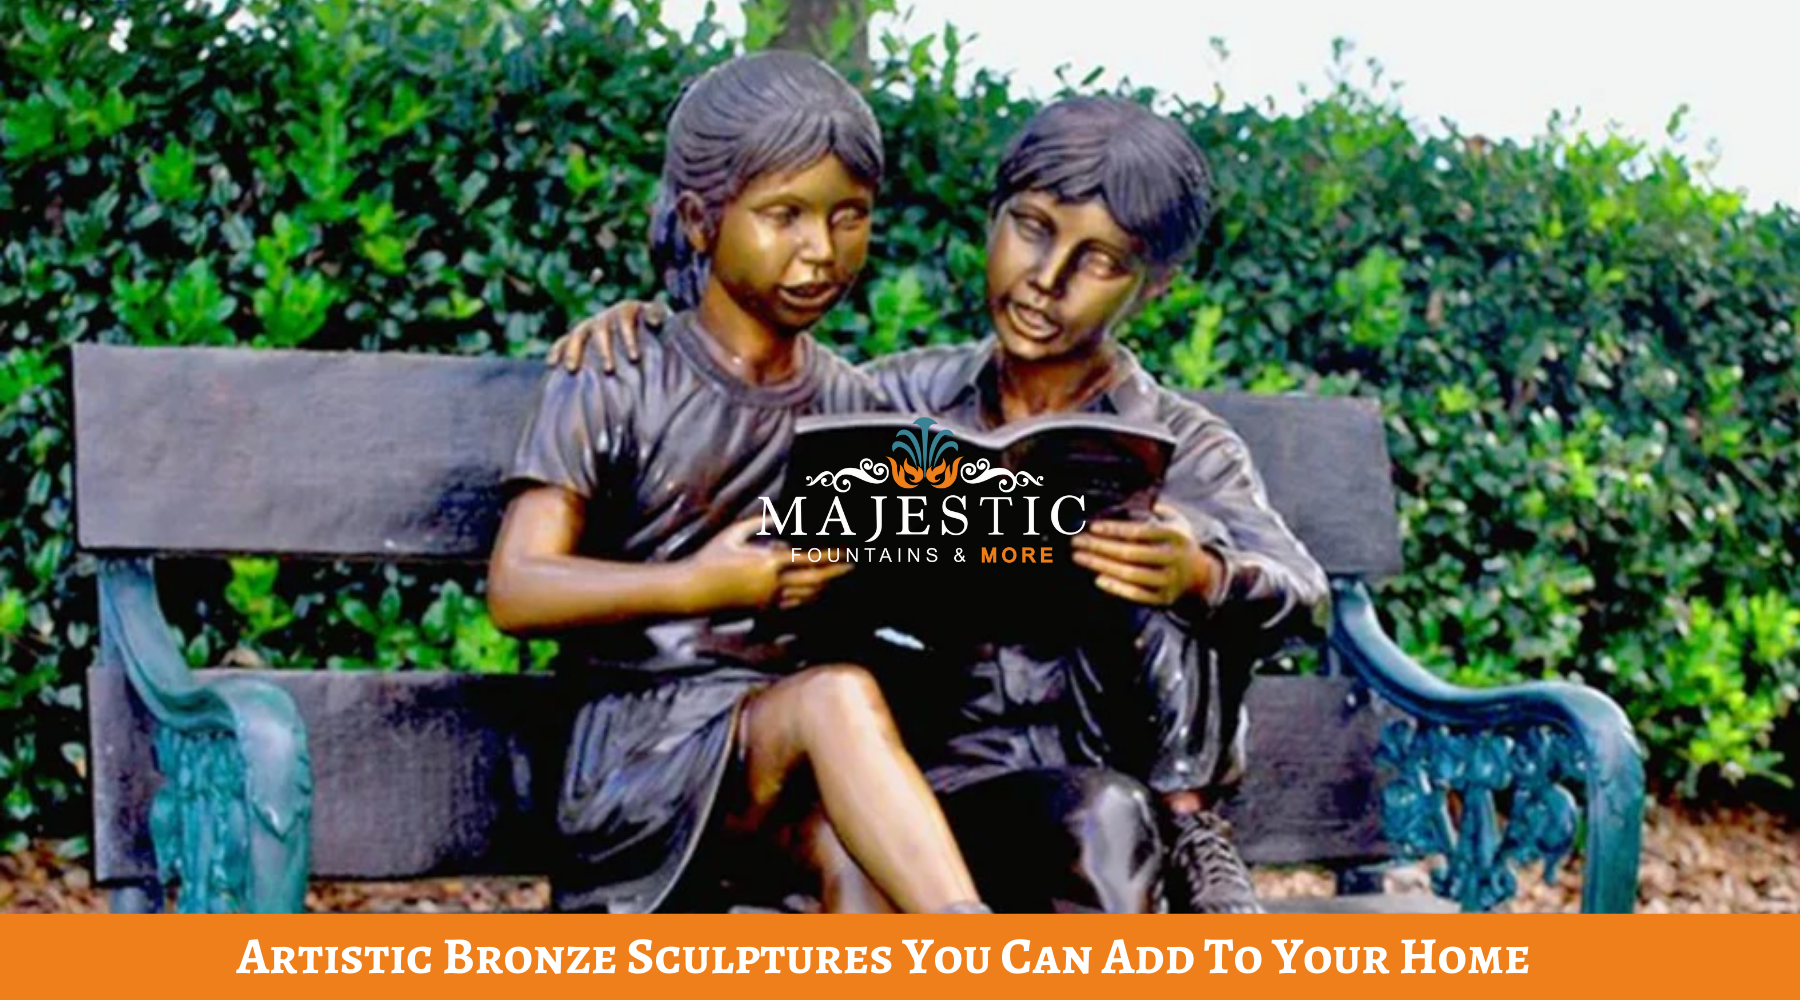 Artistic Bronze Sculptures You Can Add To Your Home